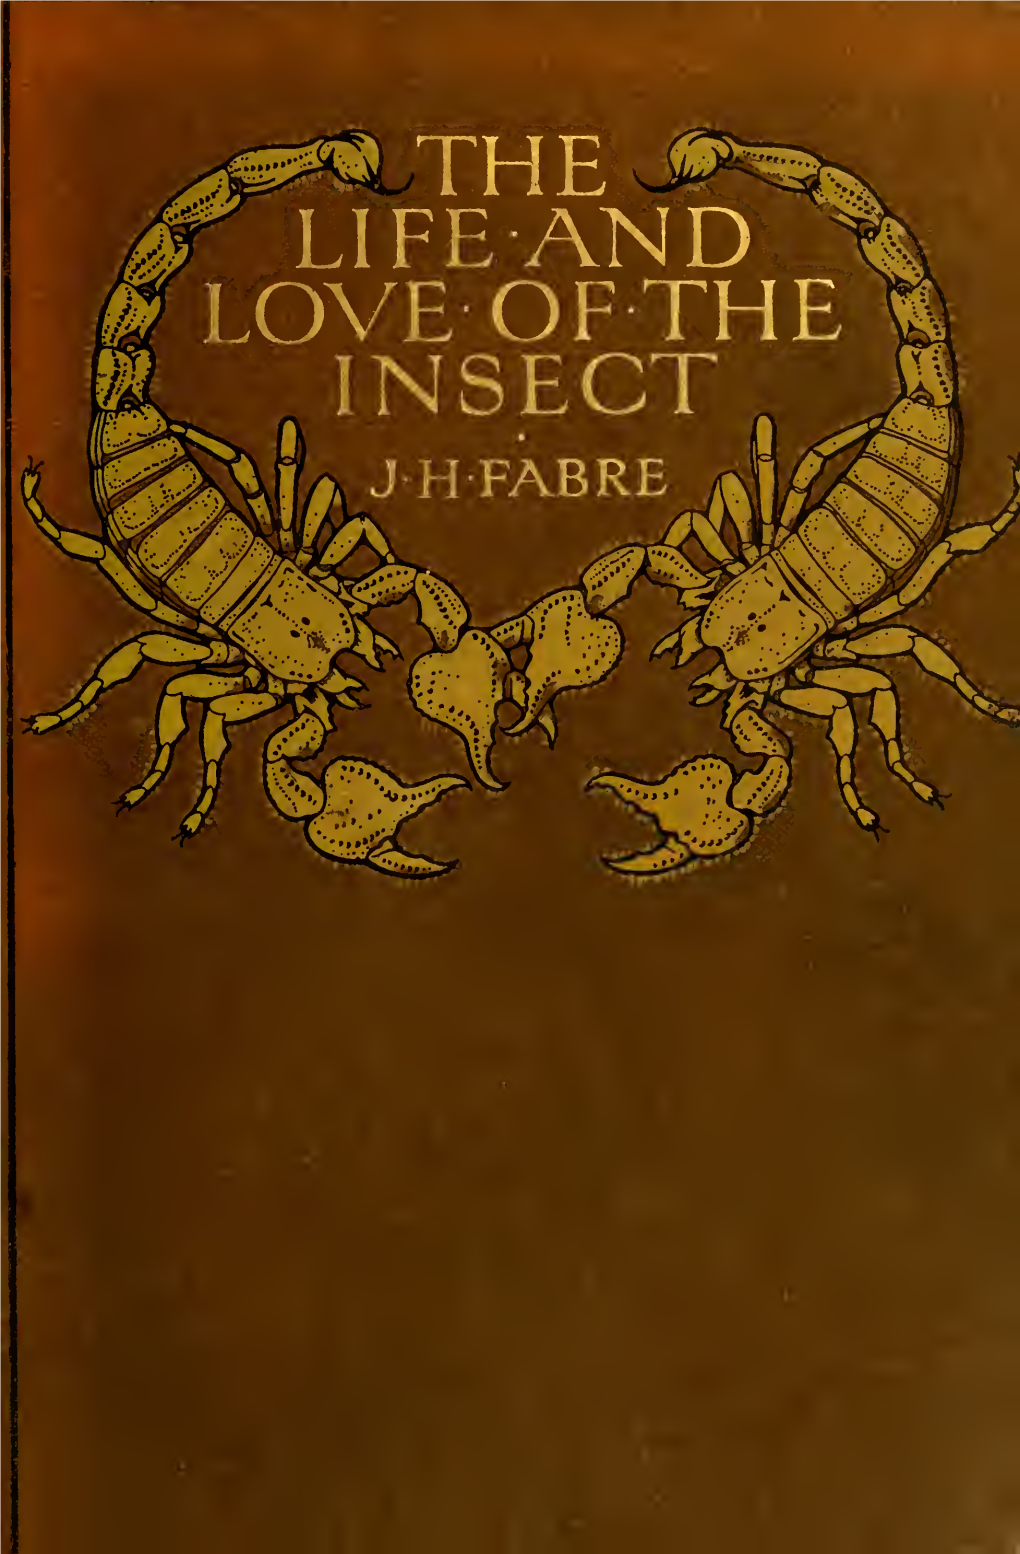 THE LIFE and LOVE of the INSECT AGFA'ts /MEKICA the MACMILLAN COMPANY 64 & 66 Fifth Avenue, New YORK